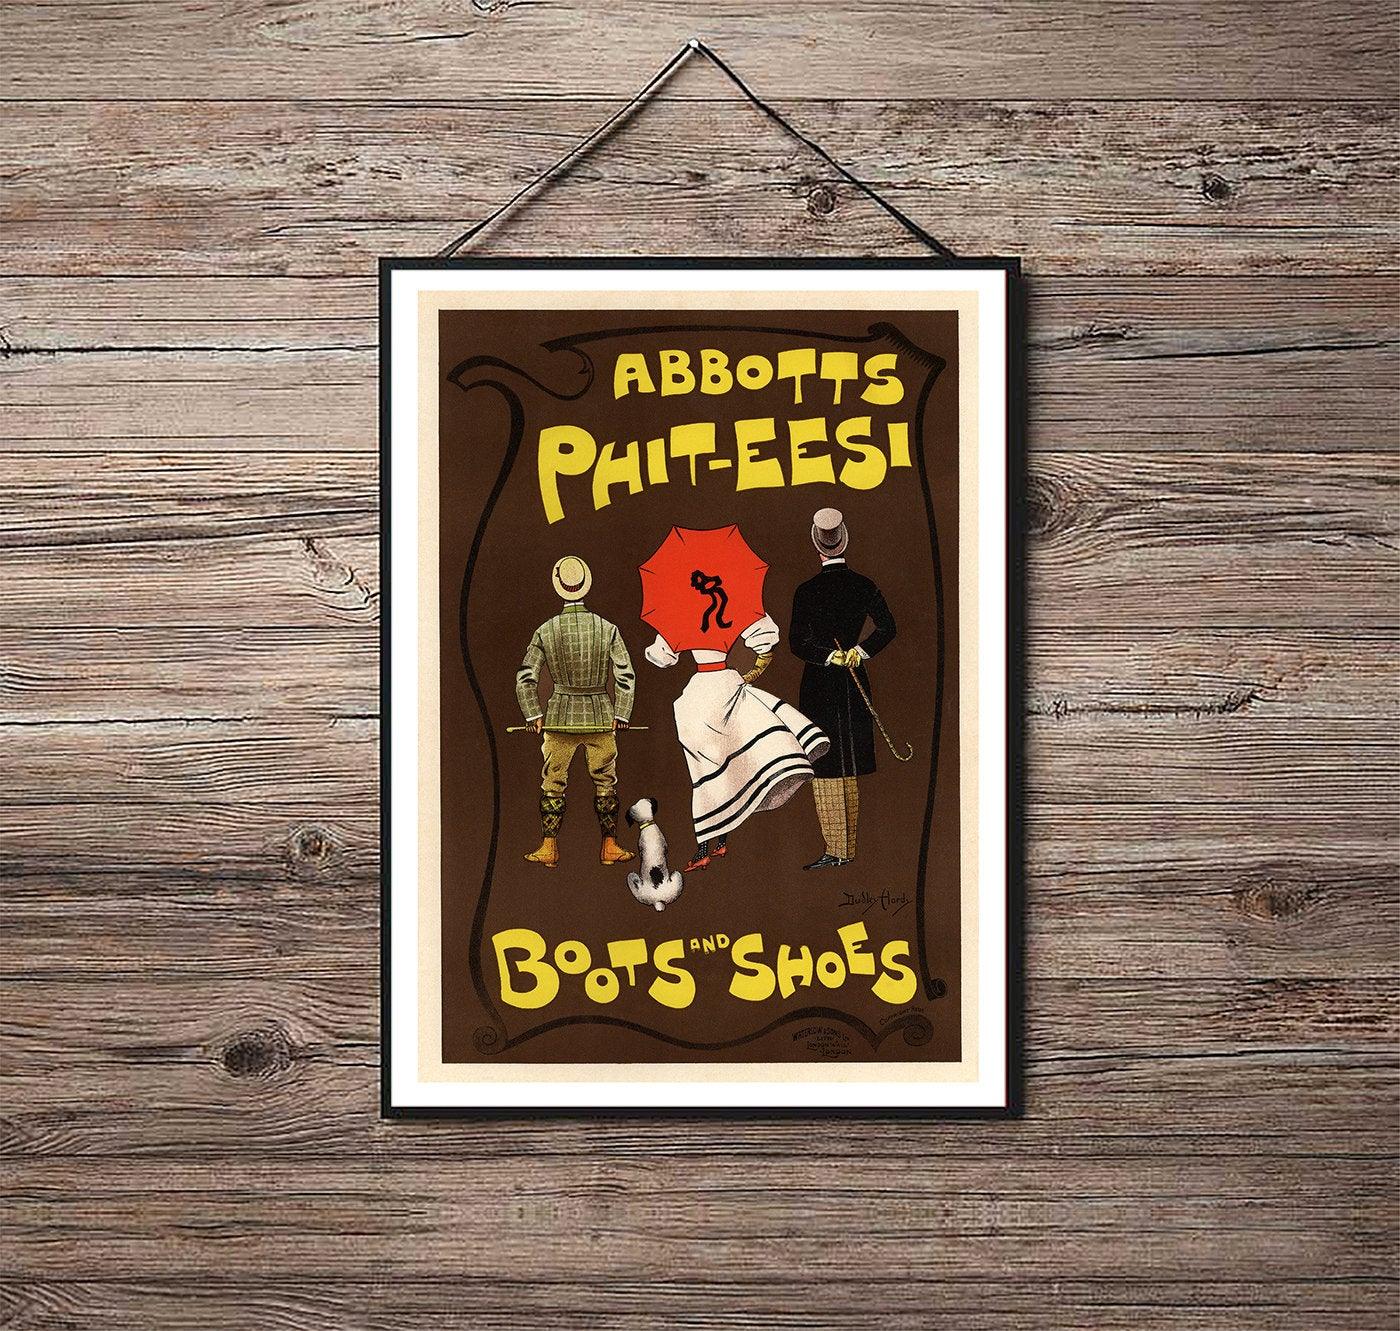 Abbotts Phit-Eesi Boots and Shoes - 1900 - Art Nouveau - Classic Posters